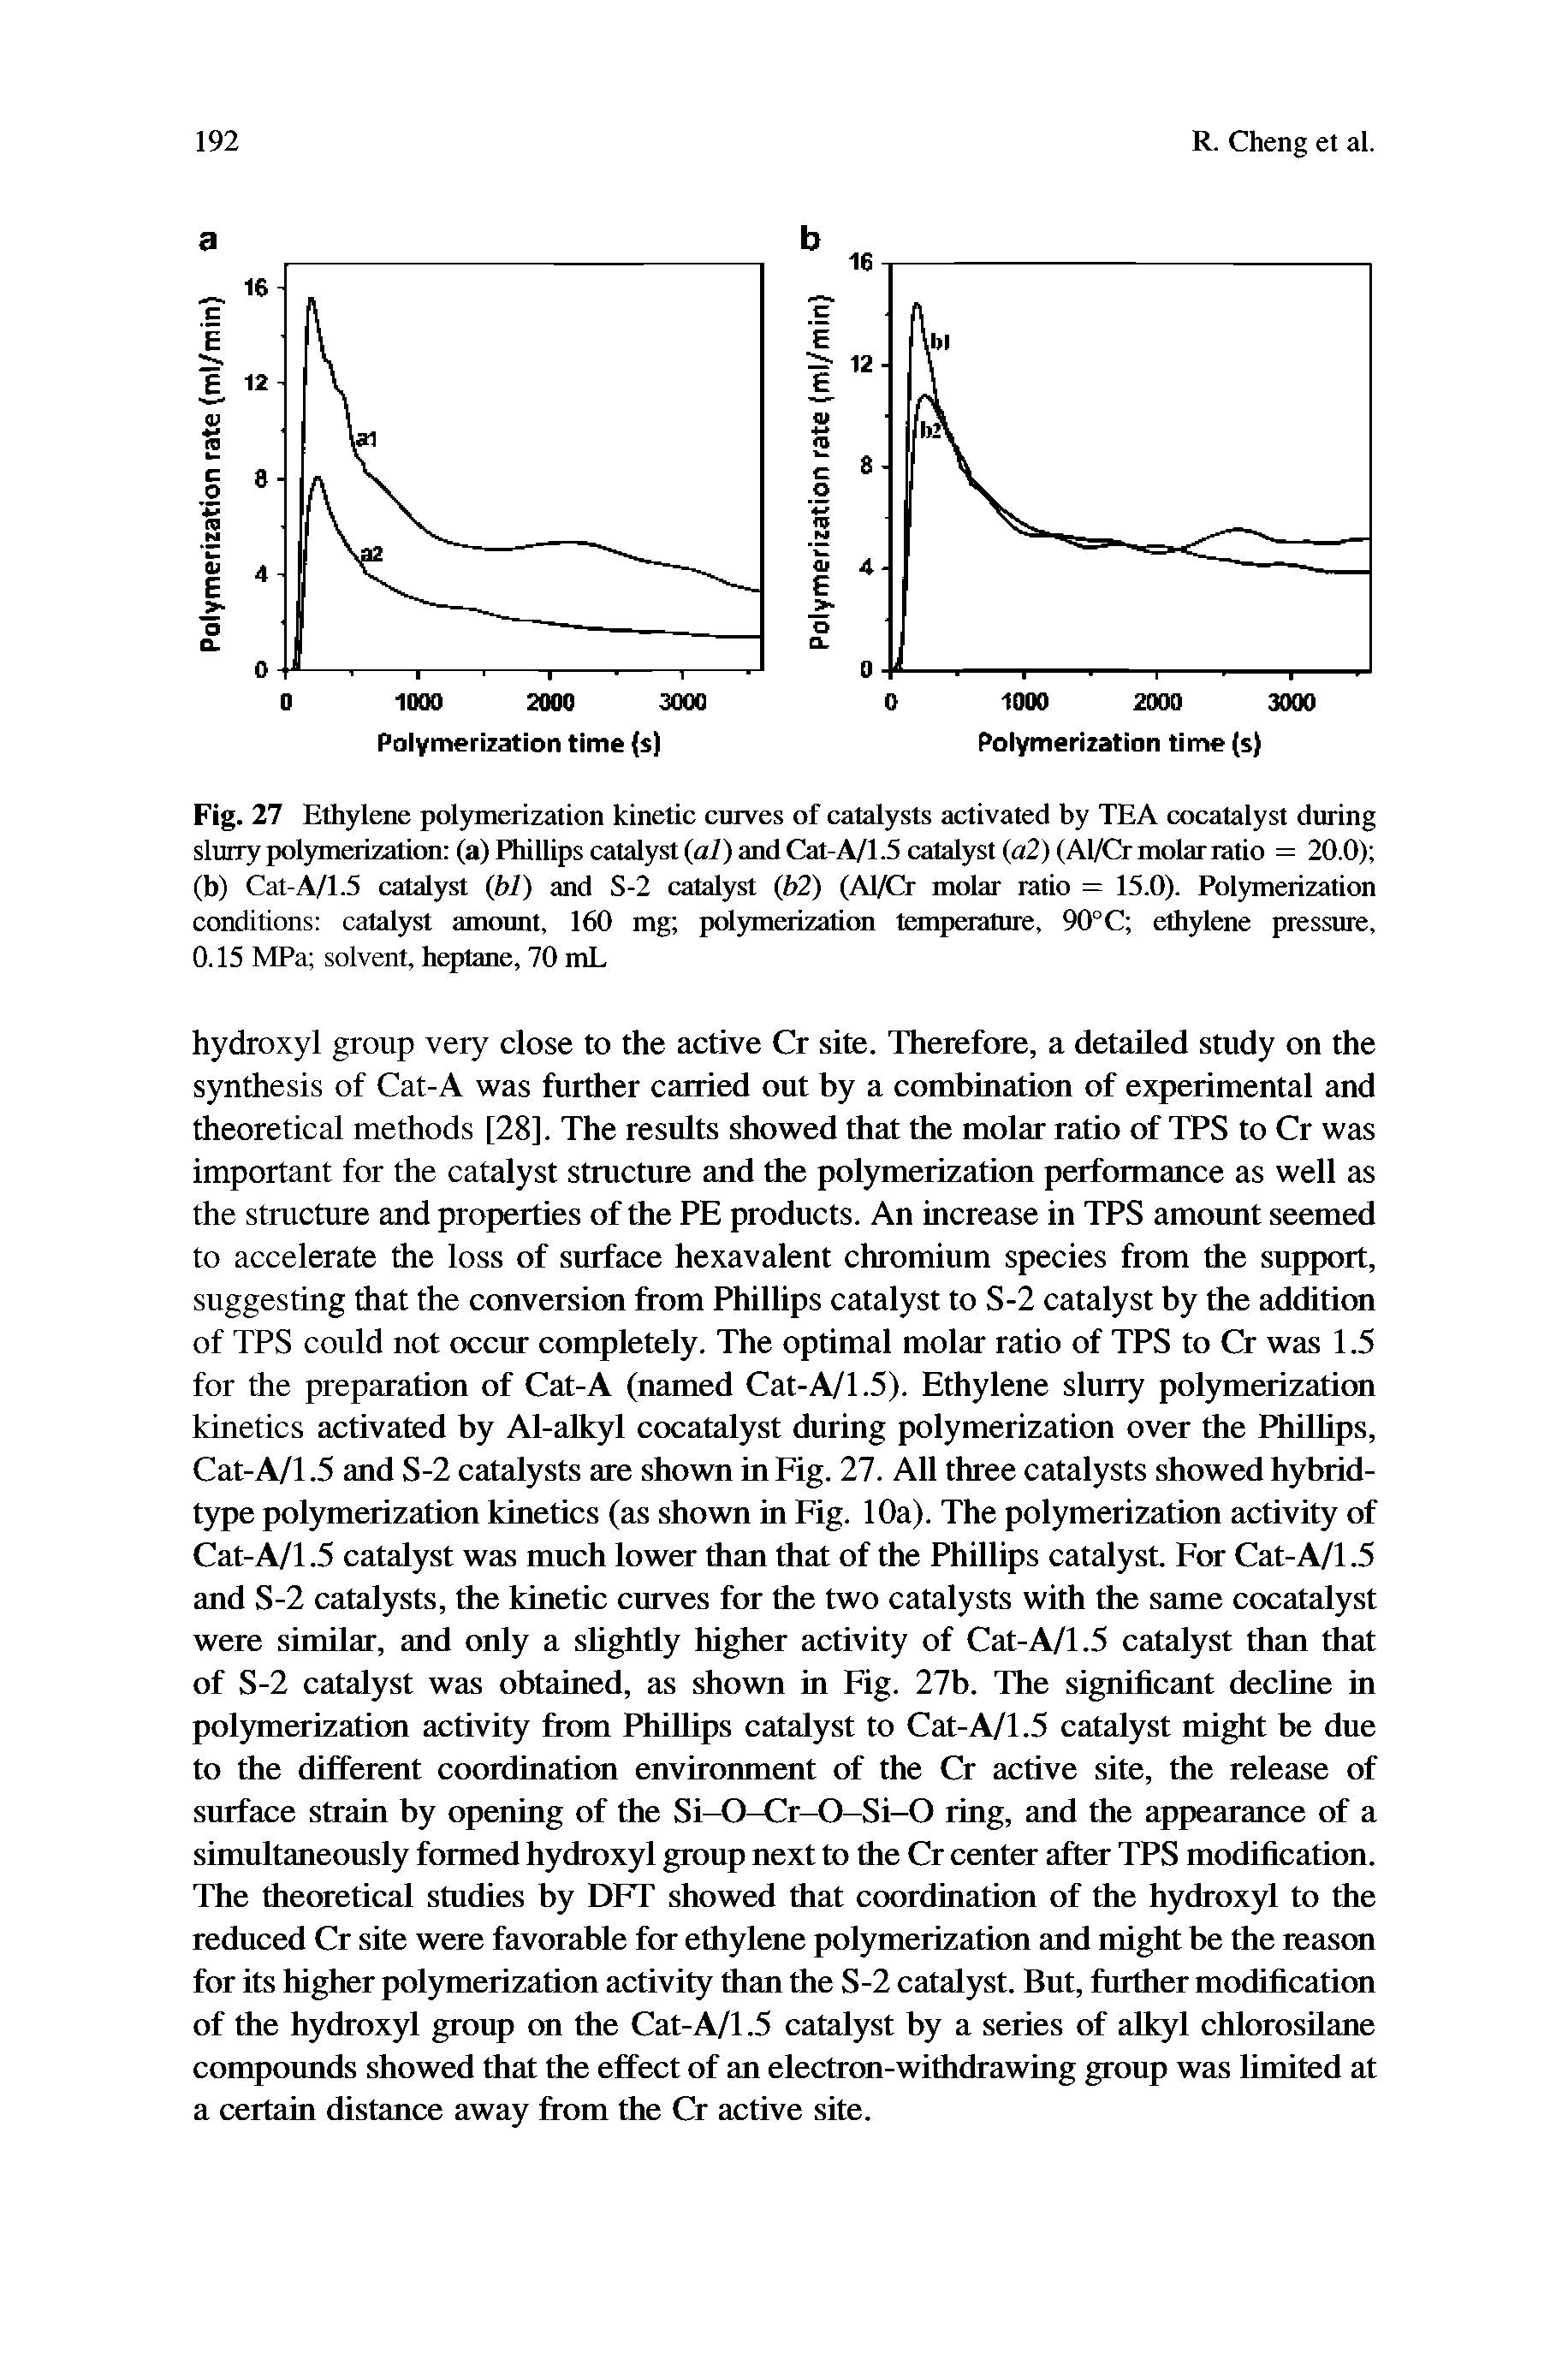 Fig. 27 Ethylene polymerization kinetic curves of catalysts activated by TEA cocatalyst during slurry polymerizatimi (a) Phillips catalyst al) and Cat-A/1.5 catalyst a2) (Al/Cr molar ratio = 20.0) (b) Cat-A/1.5 catalyst (W) and S-2 catalyst b2) (Al/Cr molar ratio = 15.0). Polymerization conditions catalyst amount, 160 mg polymerization temperature, 90°C ethylene pressure, 0.15 MPa solvent, heptane, 70 mL...